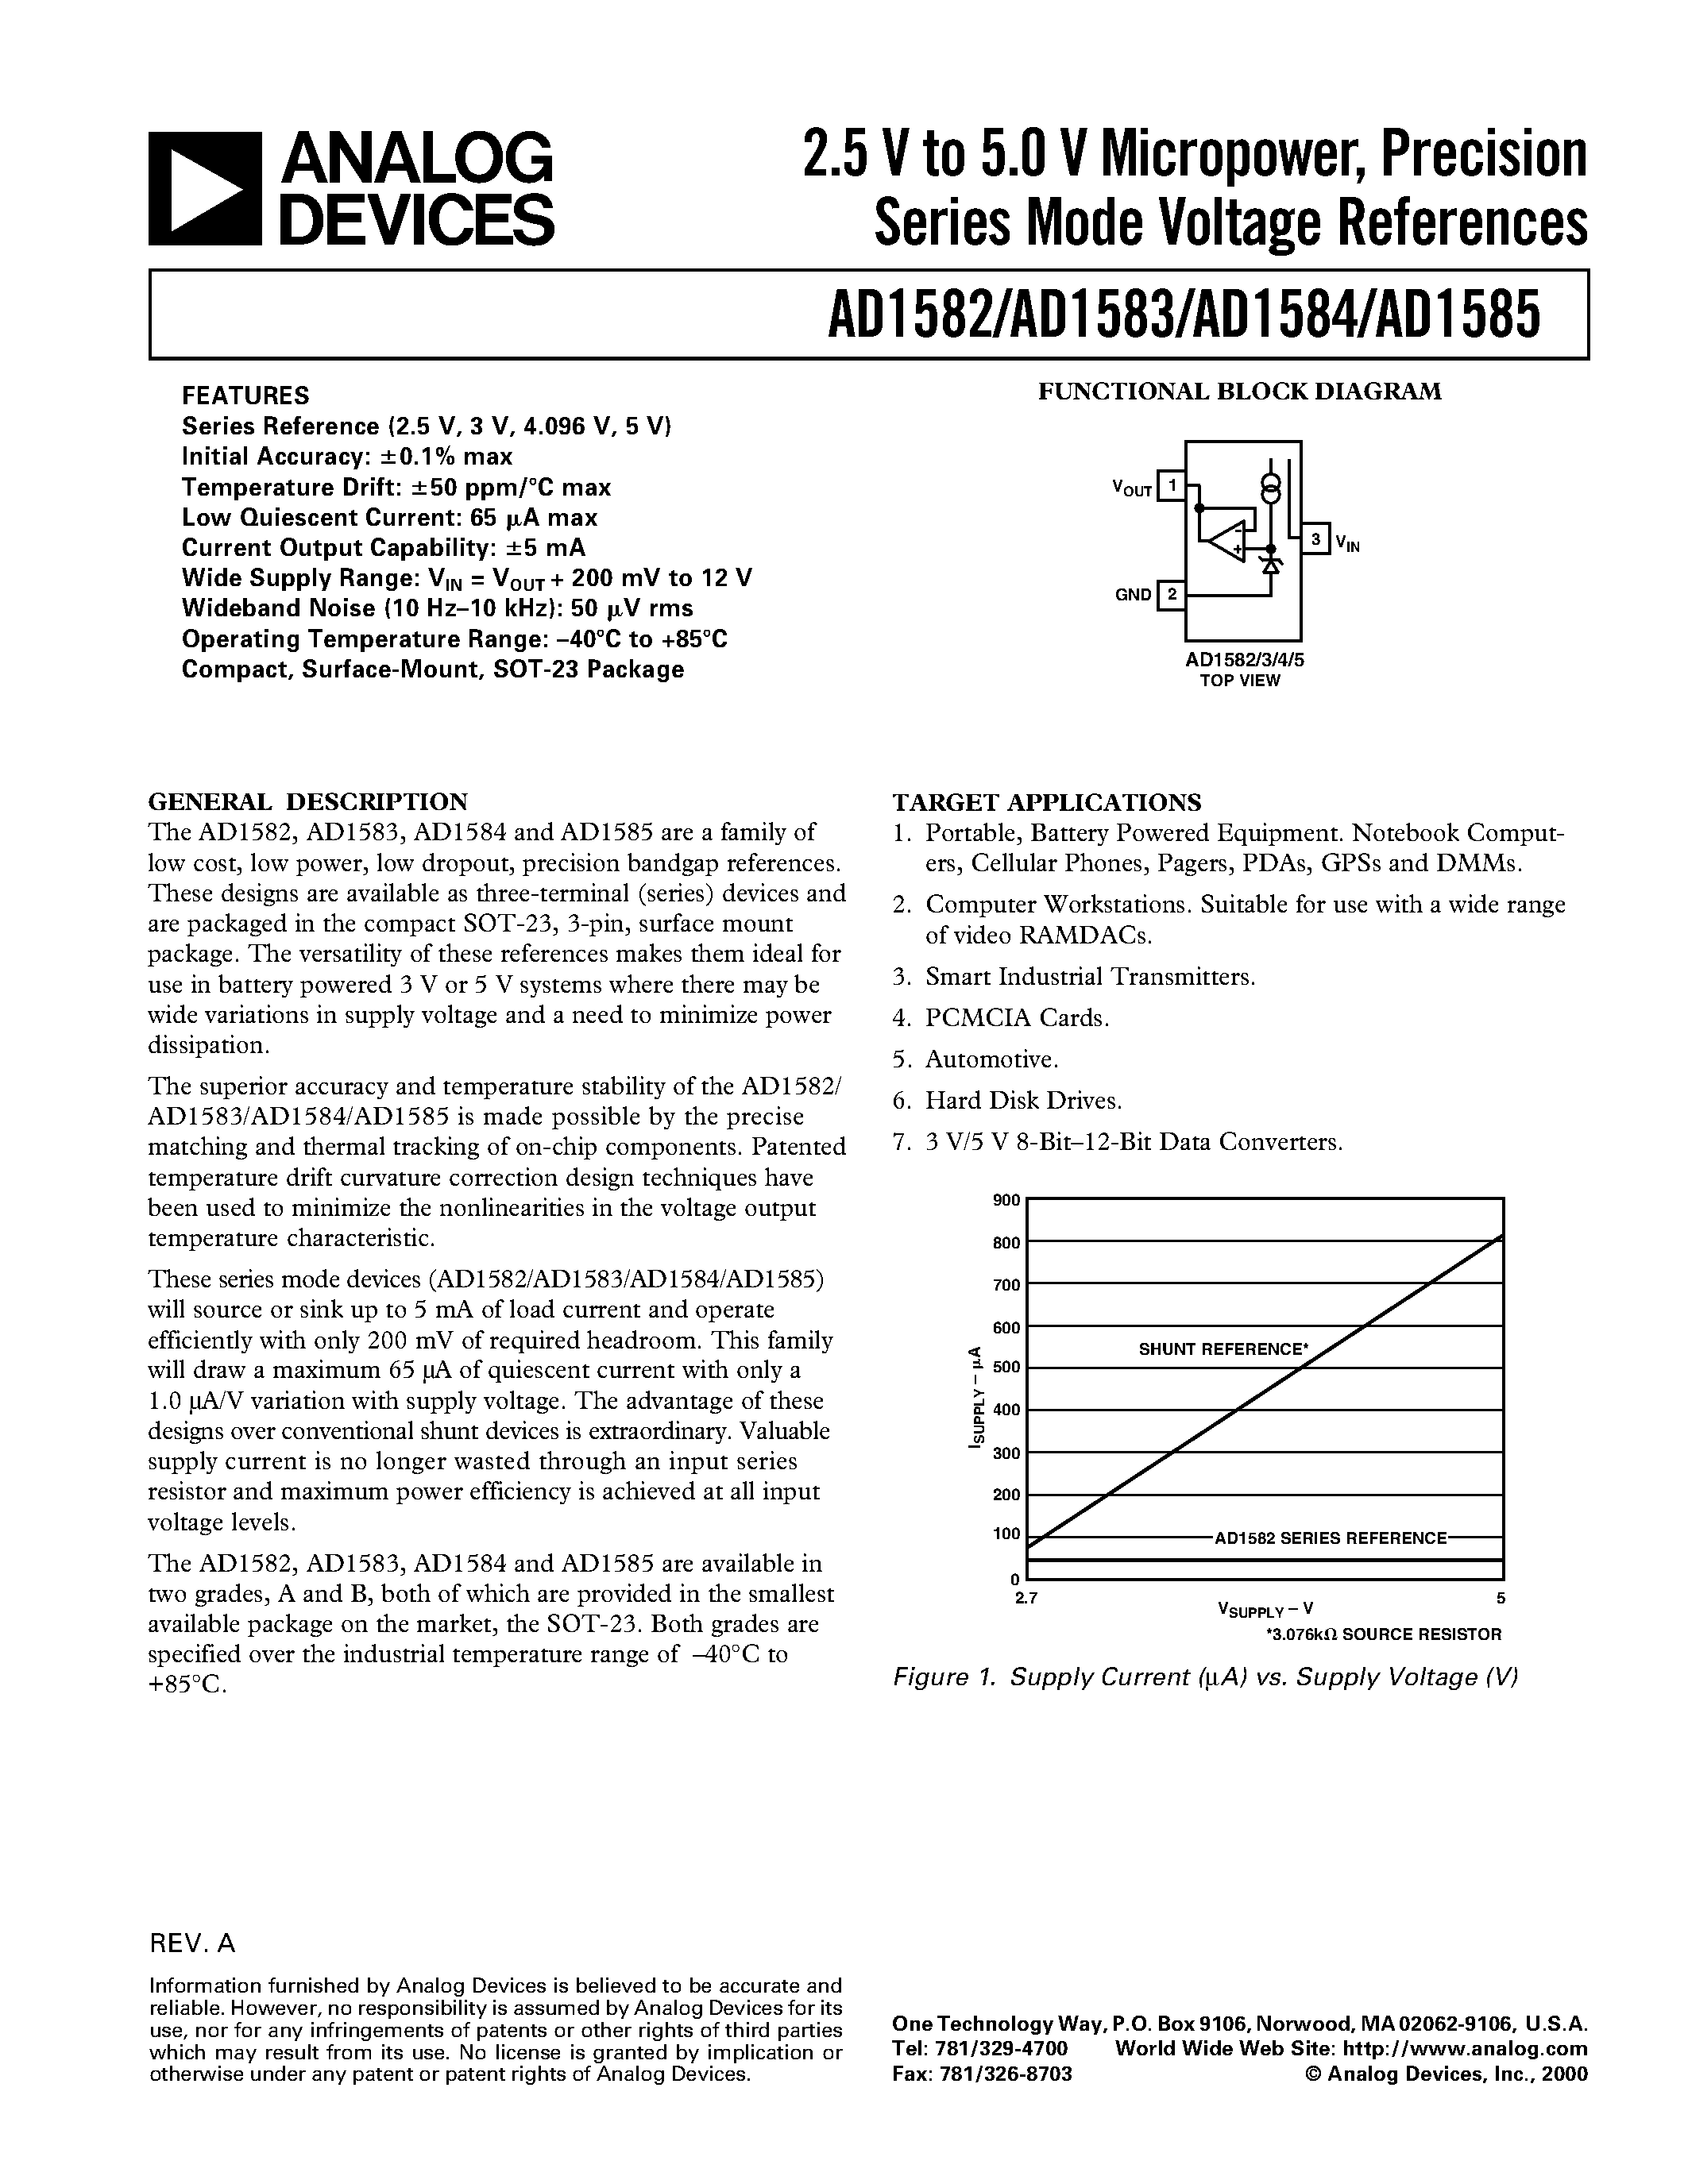 Datasheet AD1582B - 2.5 V to 5.0 V Micropower/ Precision Series Mode Voltage References page 1